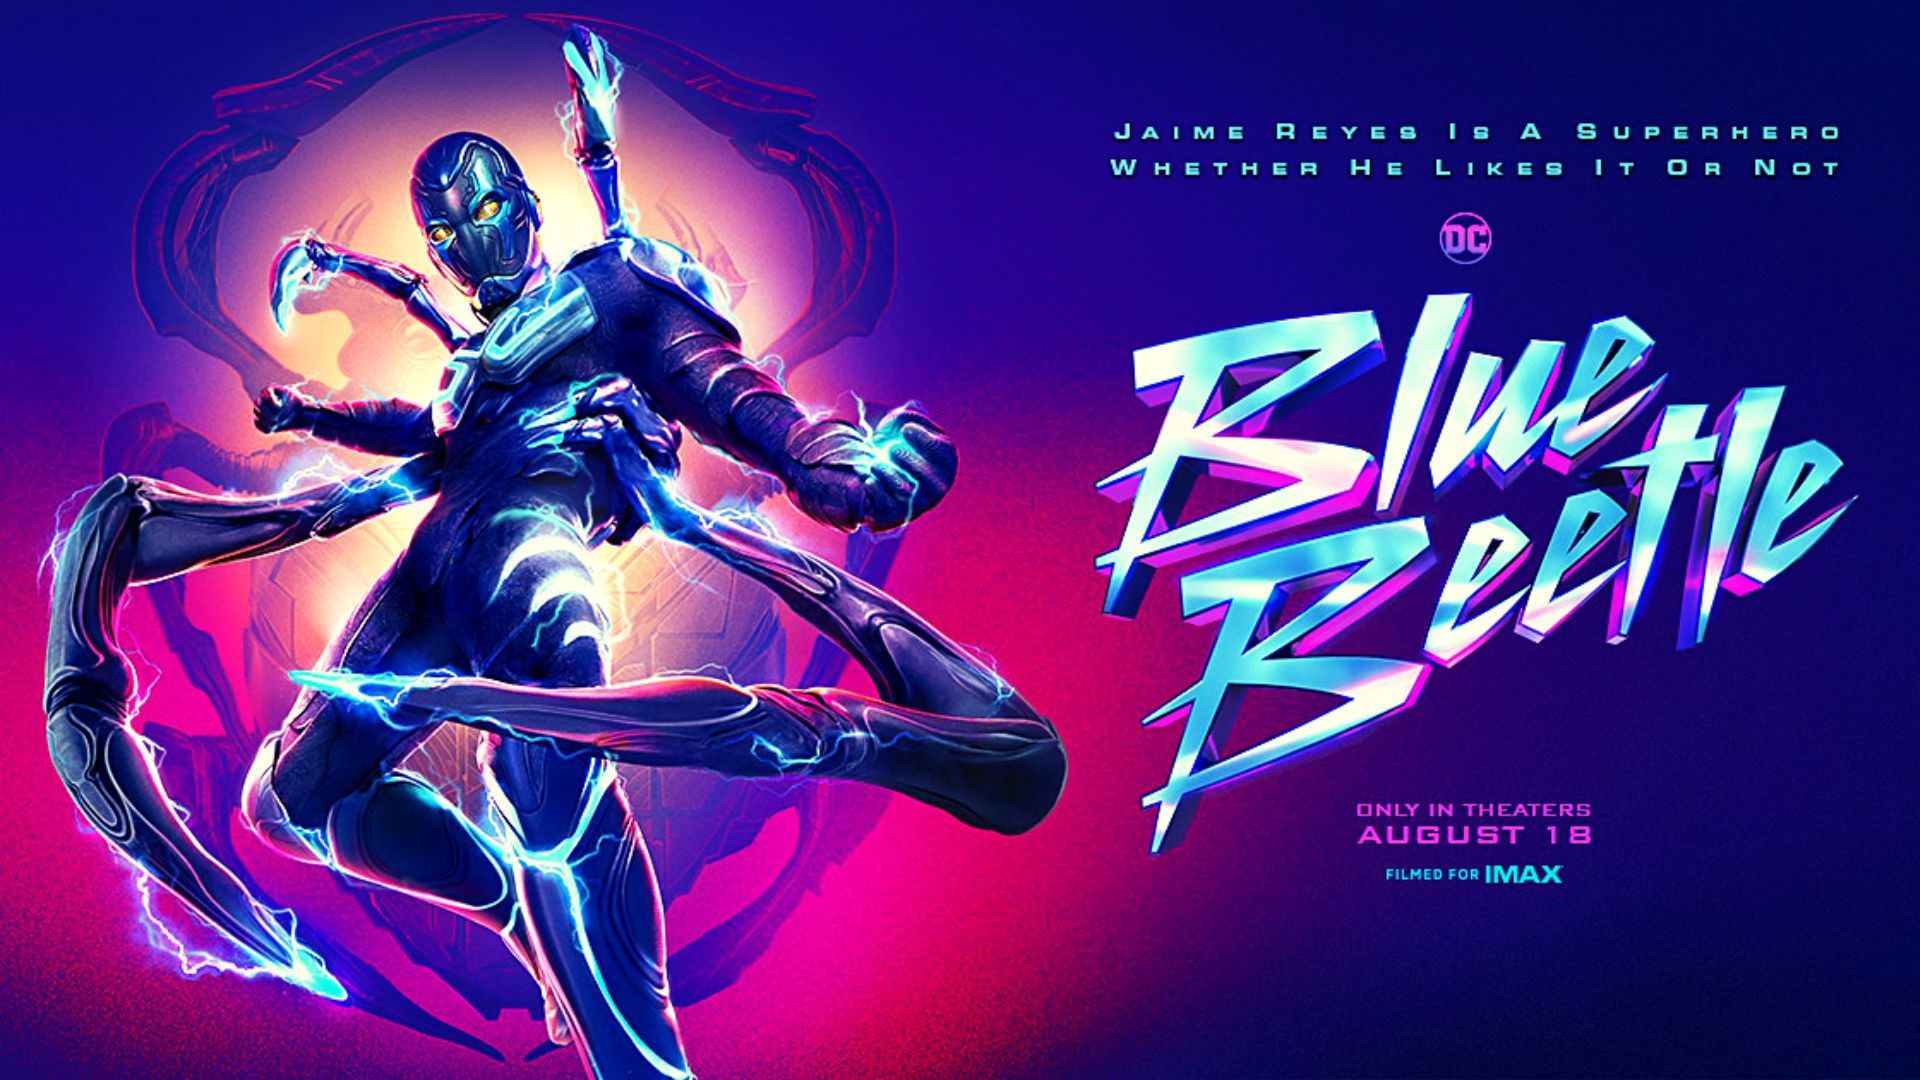 Blue Beetle Movie Ticket Offers: Release Date, Cast, Trailer & More